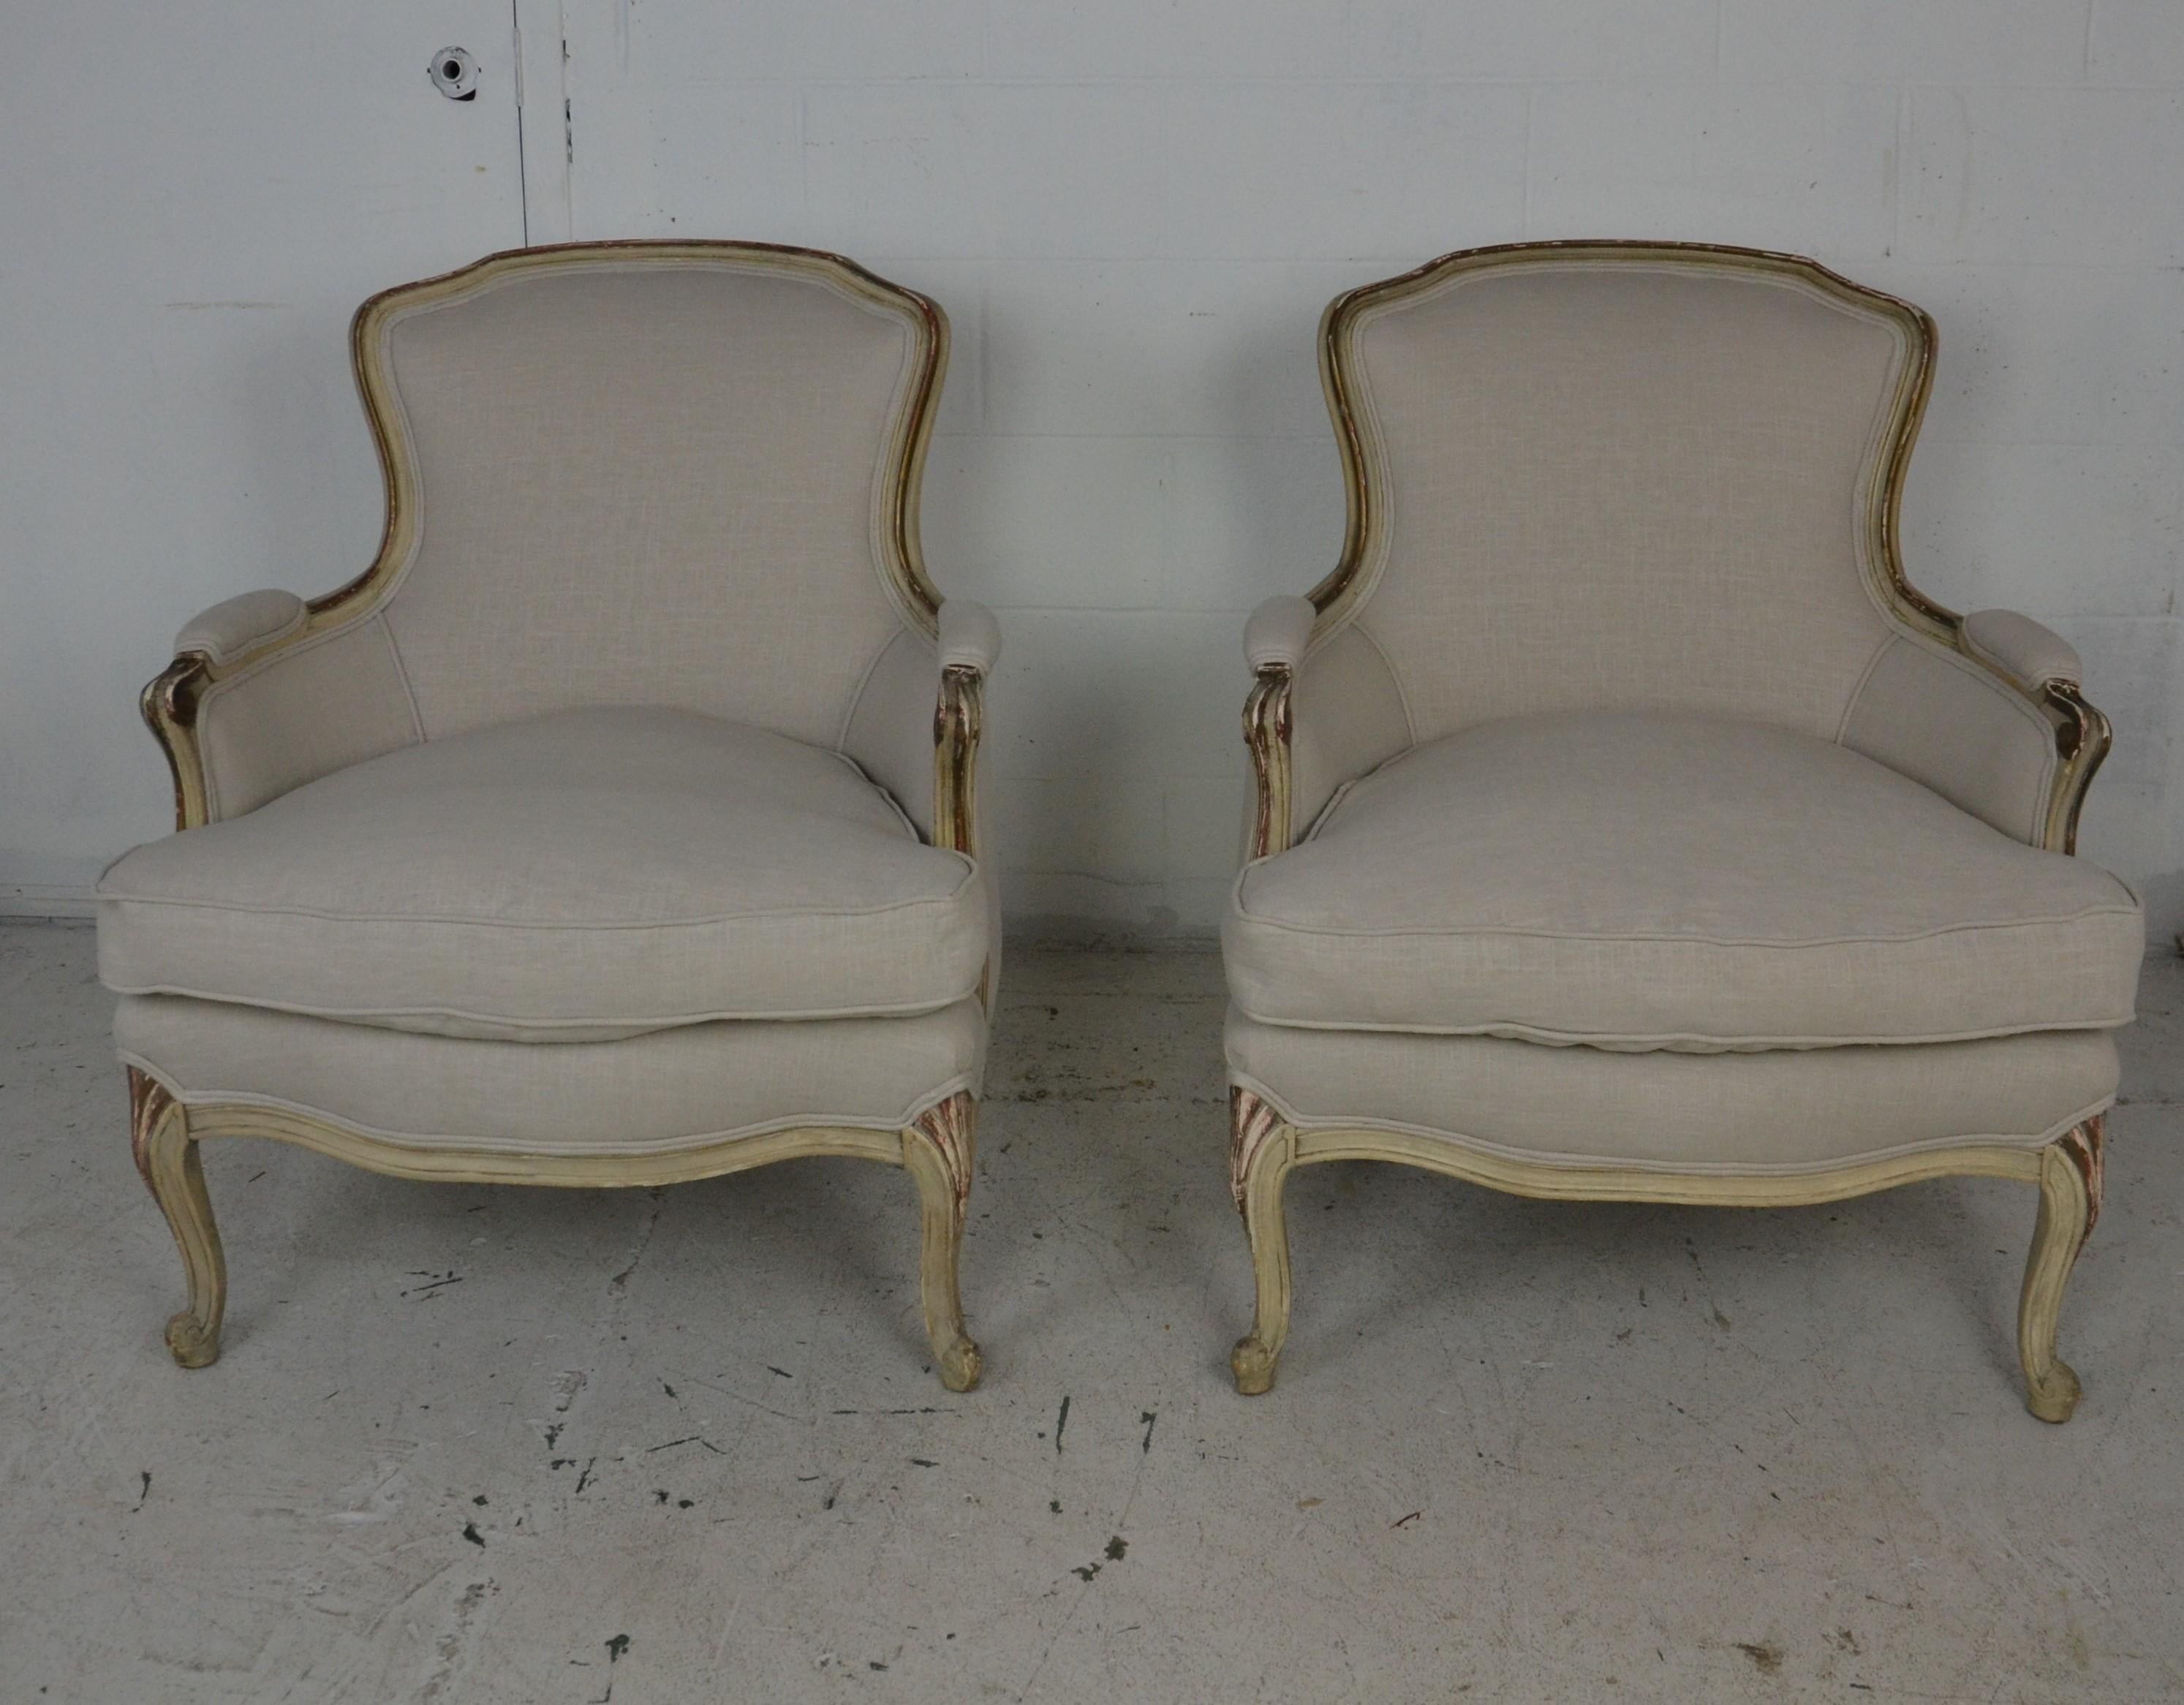 A pair of Louis XV Armchairs newly upholstered in a neutral gray linen. Frames with original old paint finish showing wear and fading.